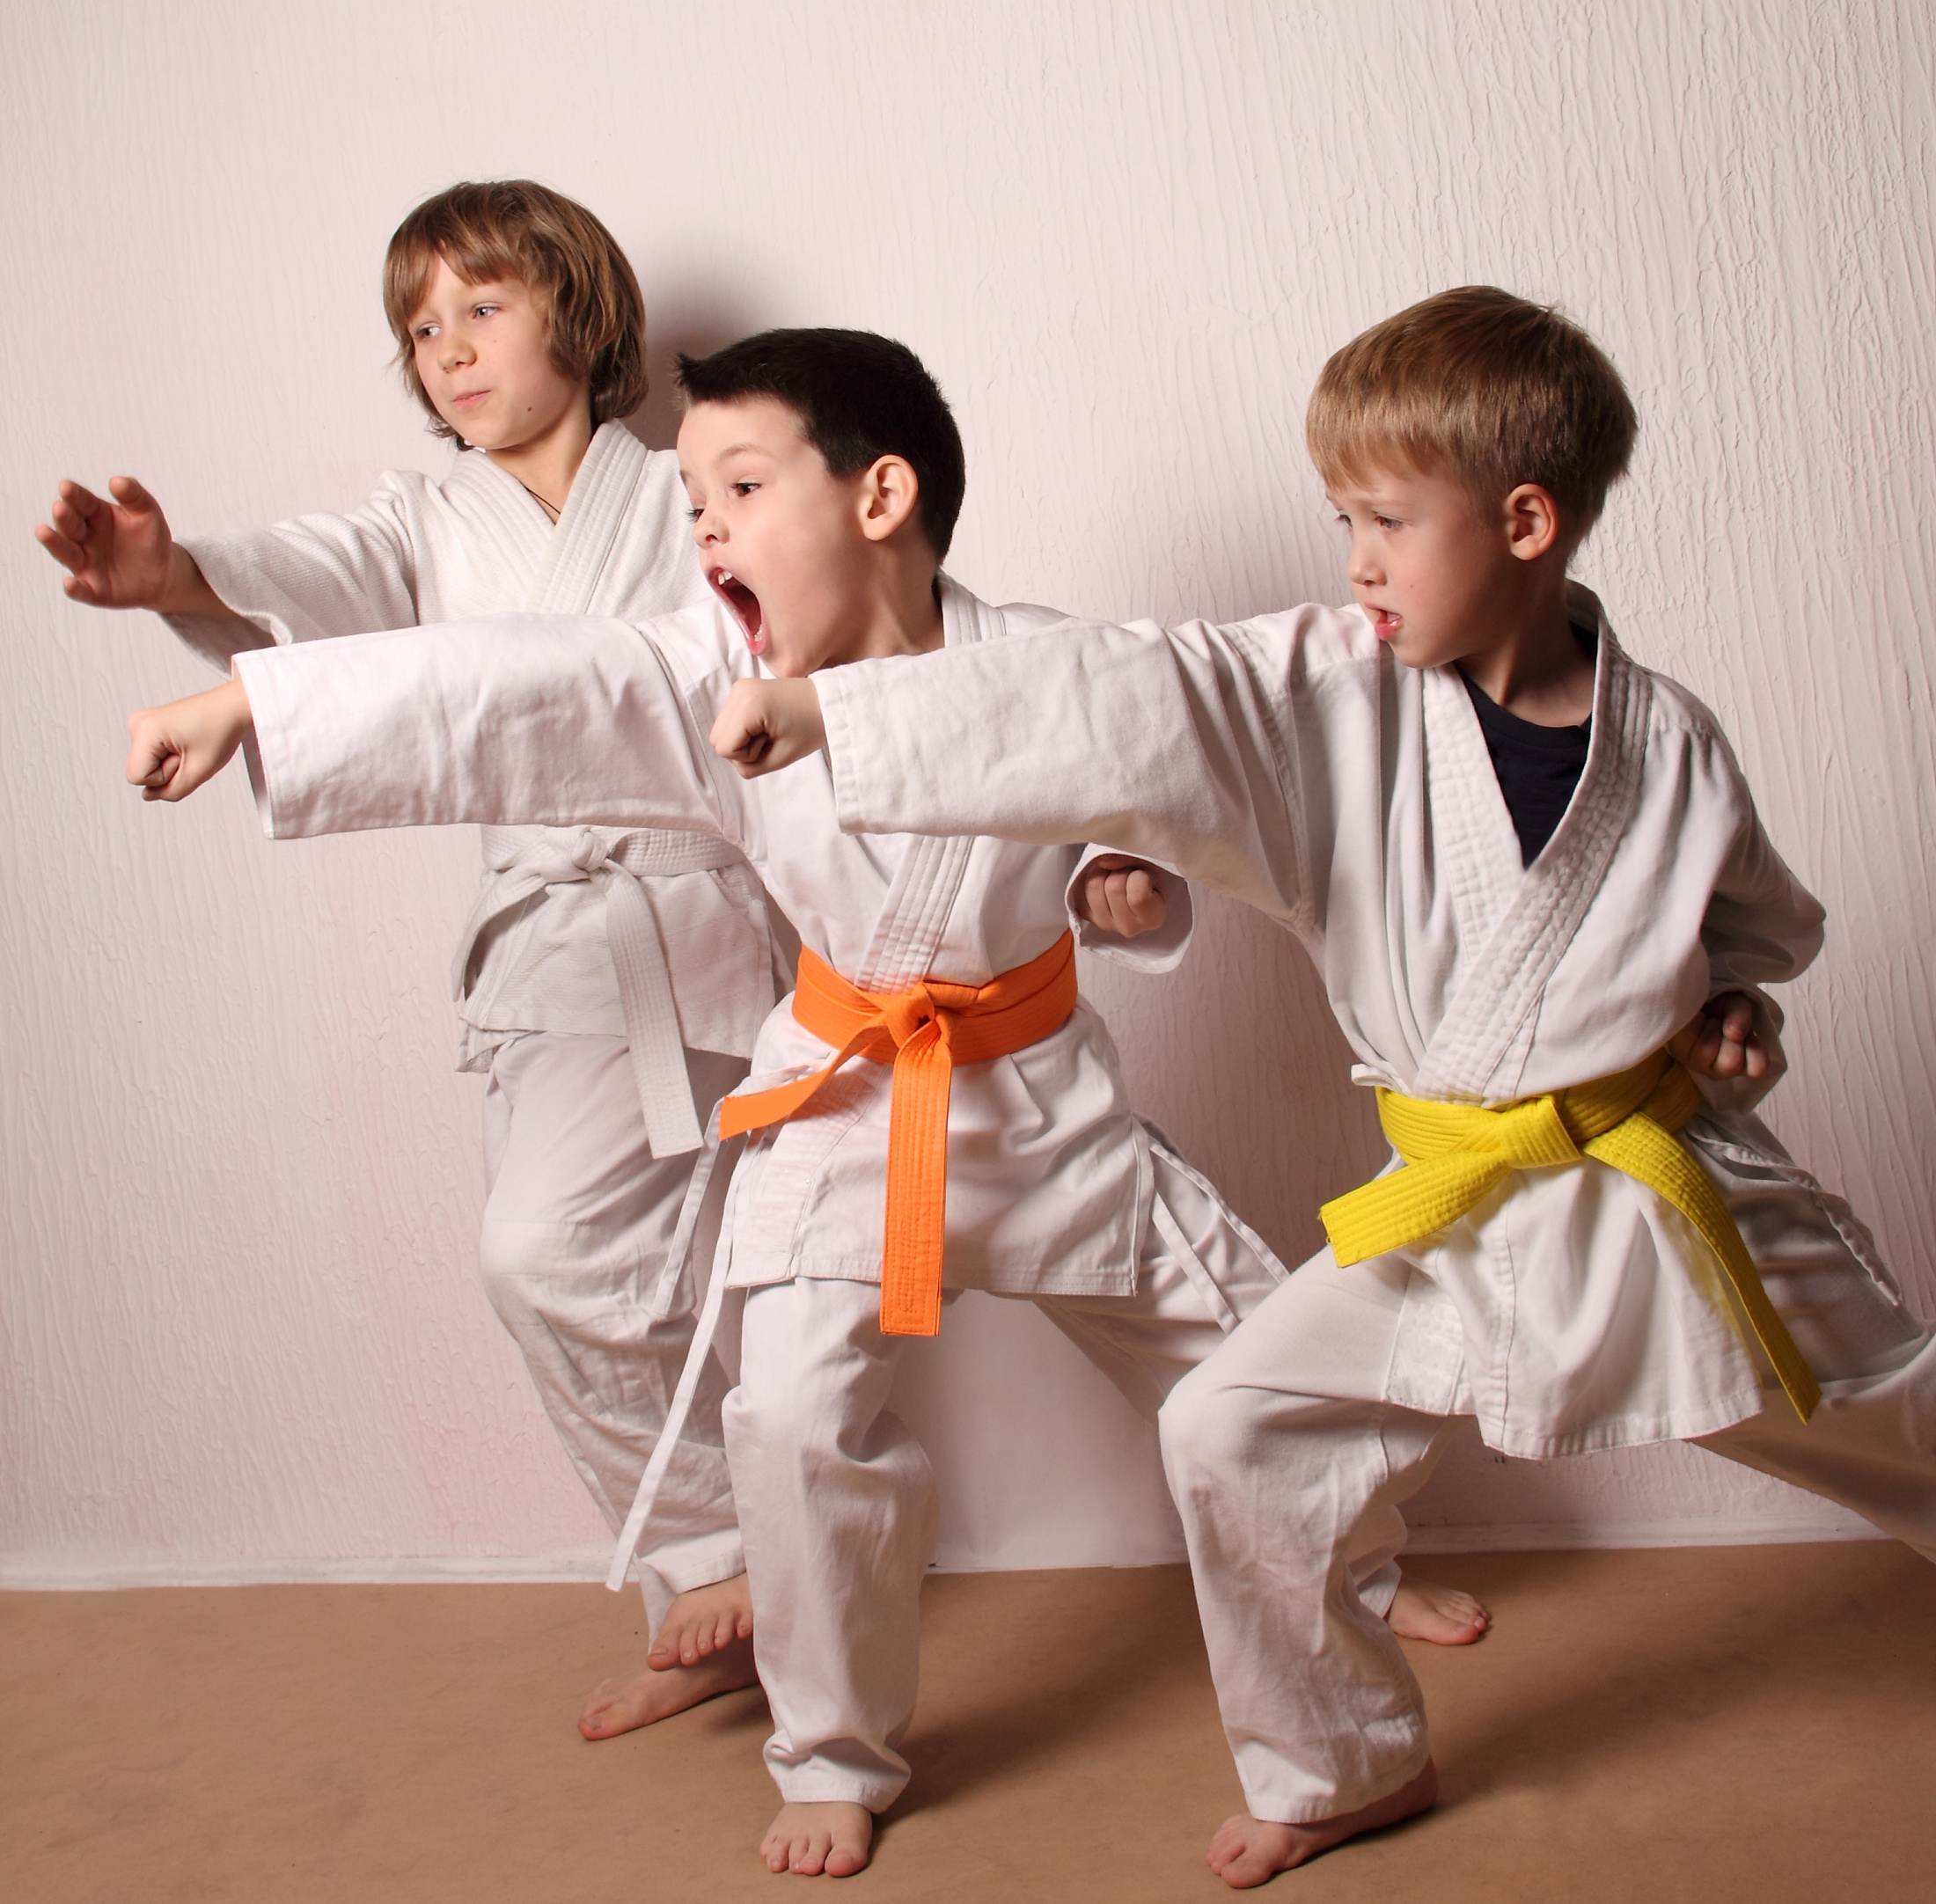 Kids during karate training. Martial arts.Sport, active lifestyle